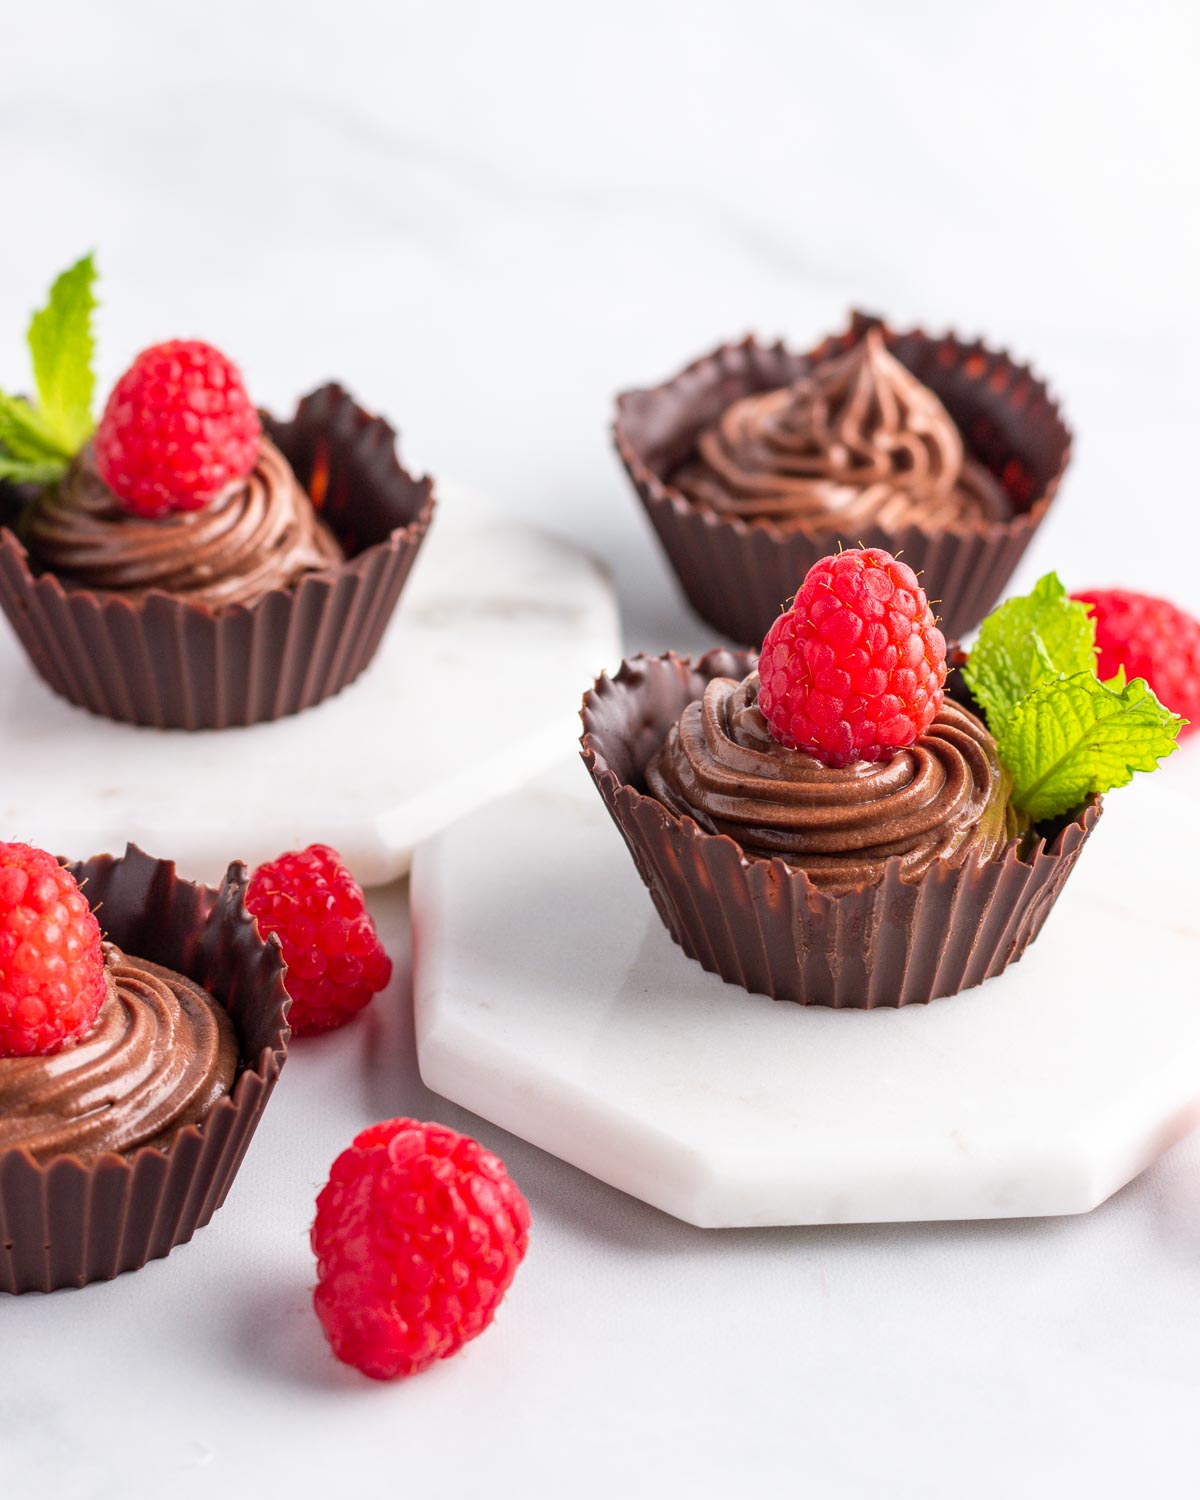 Four chocolaet cups filled with chocolate mousse and topped with a raspberry.